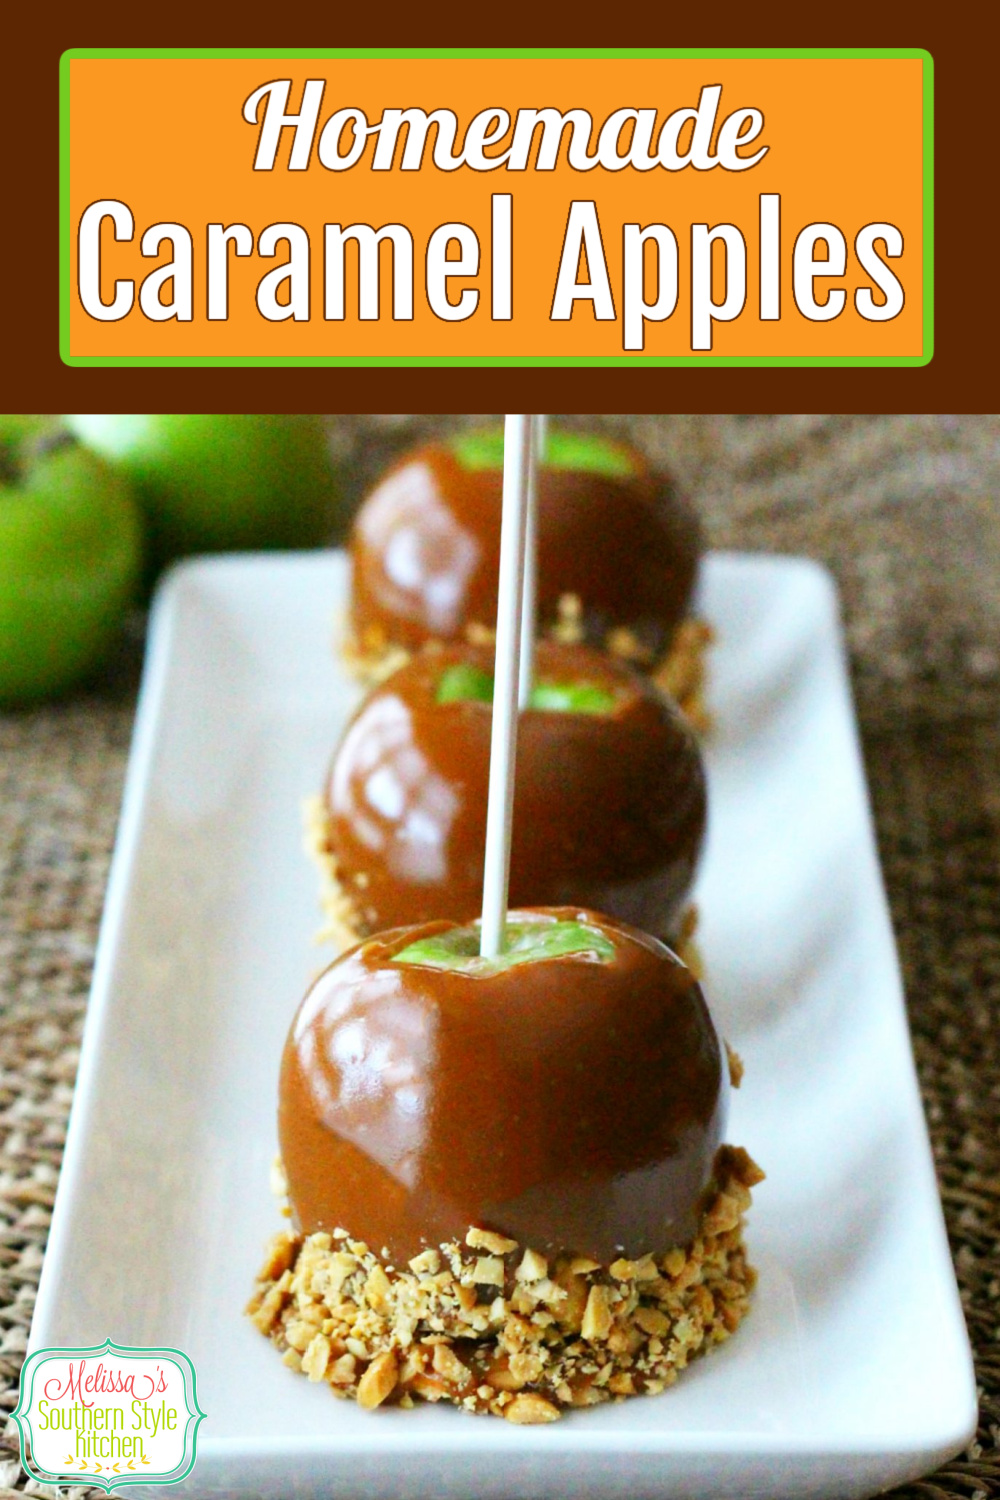 Make your own Caramel Dipped Apples using your favorite variety of apples into this buttery homemade caramel then roll them in nuts, candy, pretzels and more #carameldippedapples #caramelapples #homemadecaramel #apples #candyapples #halloween #fall #desserts #dessertfoodrecipes #southernfood #southernrecipes via @melissasssk